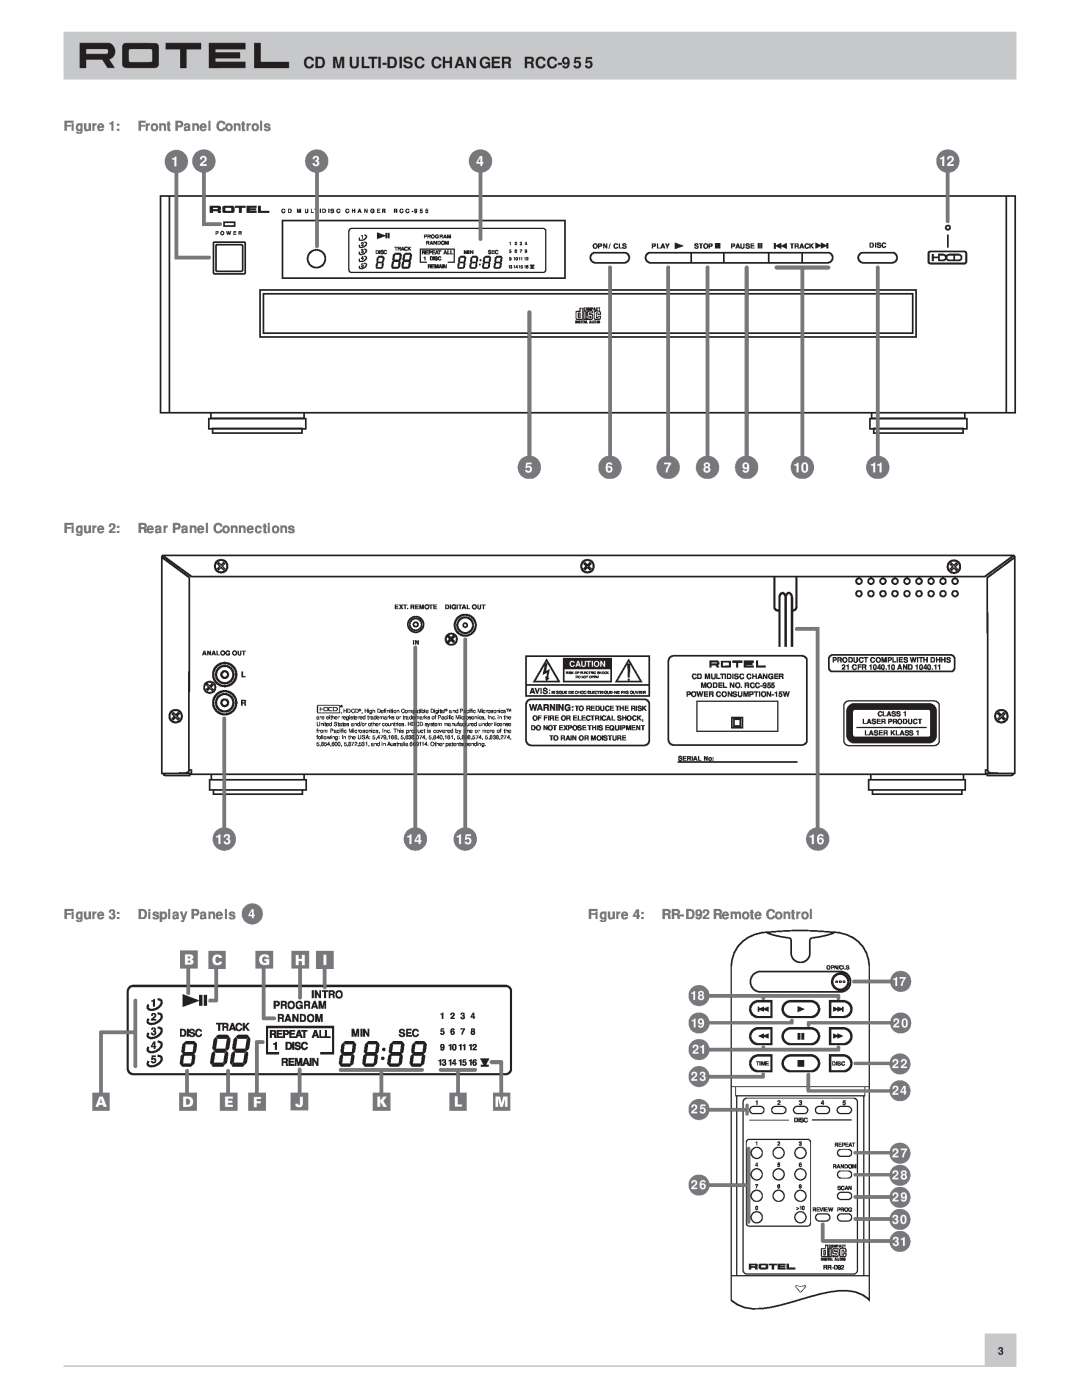 Rotel owner manual Front Panel Controls, Rear Panel Connections, Display Panels, CD MULTI-DISCCHANGER RCC-955, 1314 